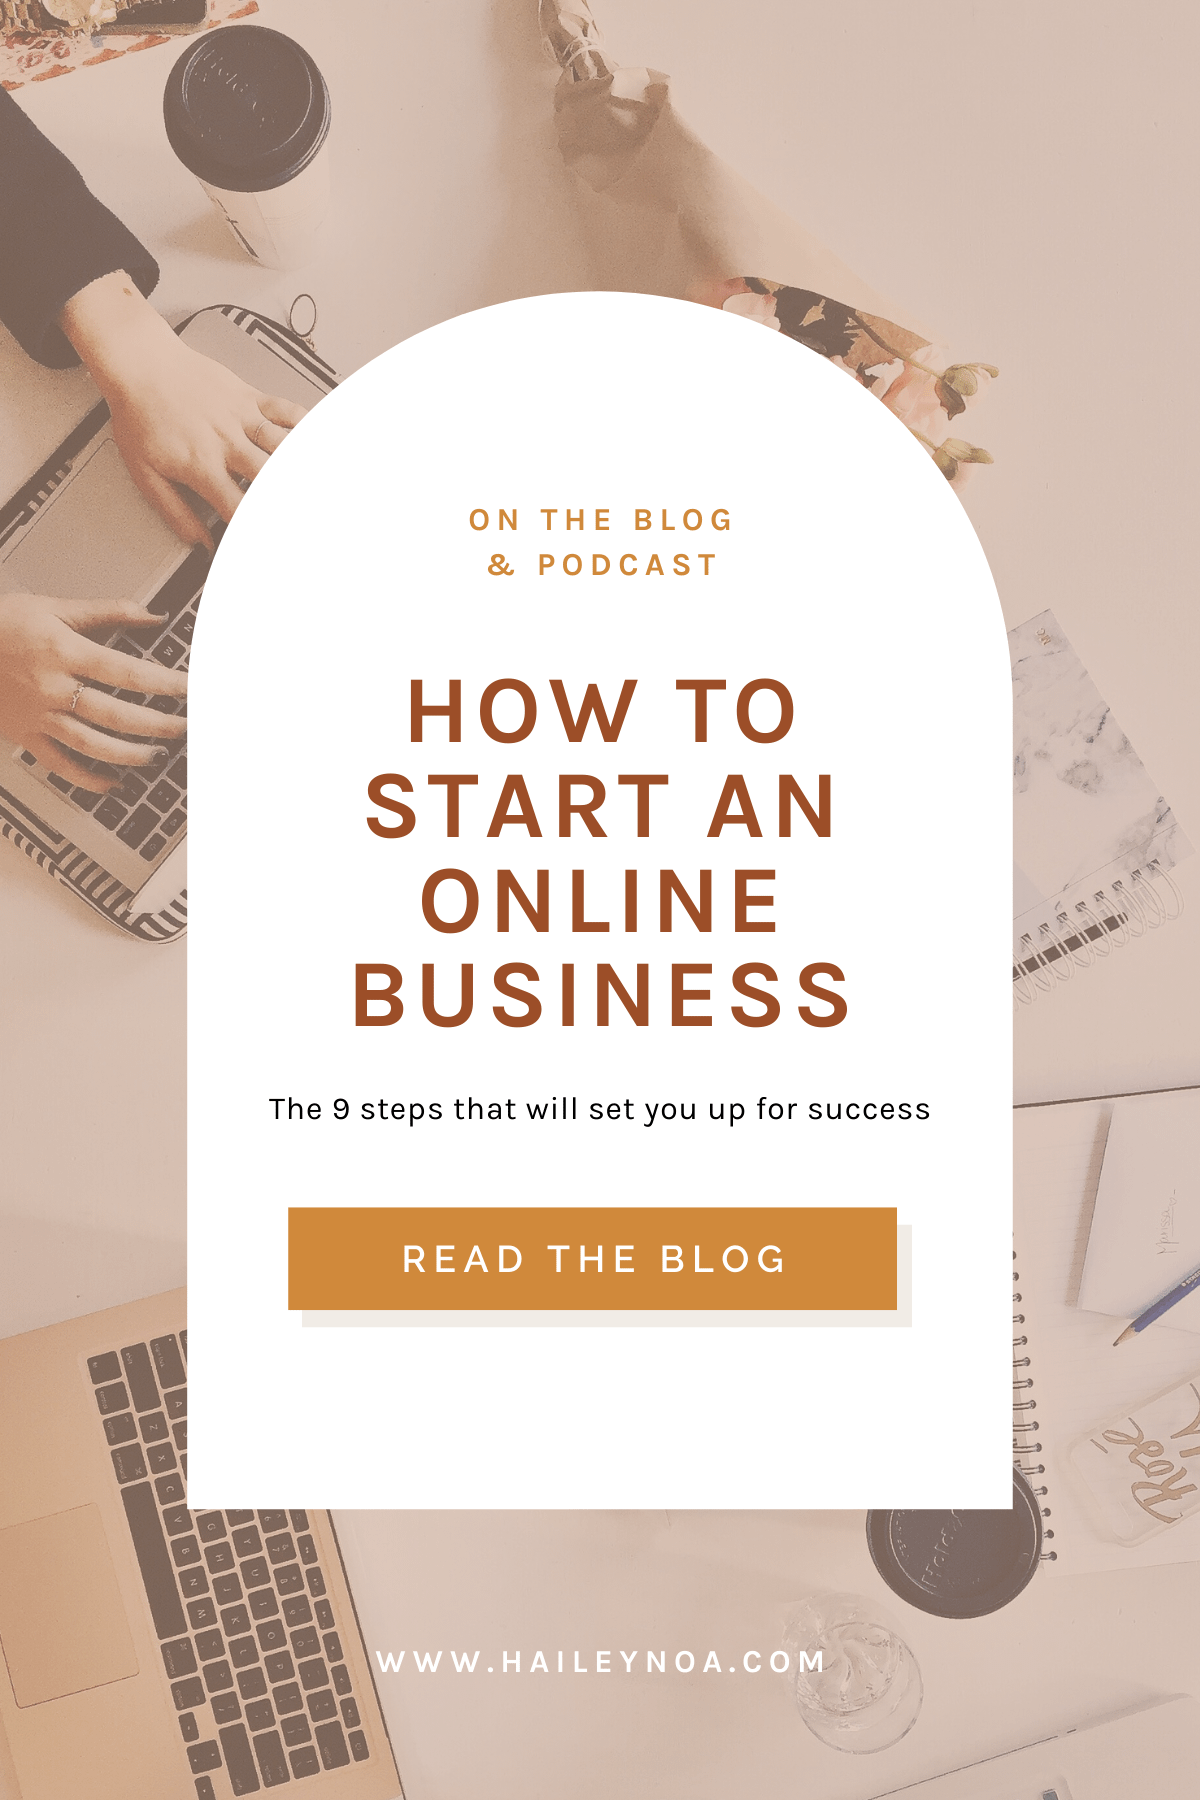 How to start an online business: the 9 steps for success